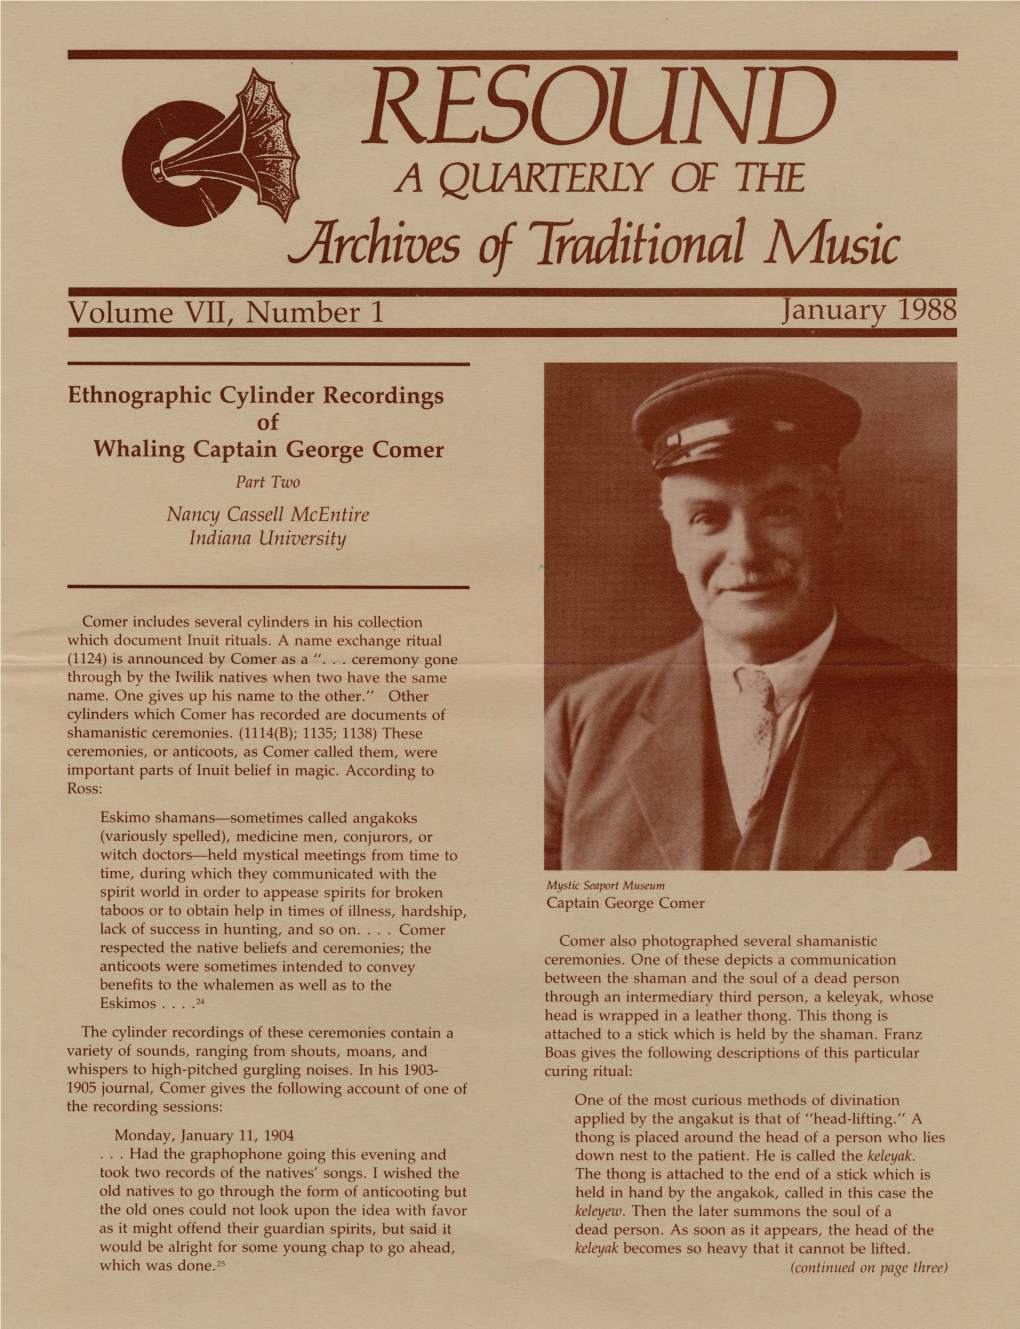 RESOUND a QUARTERLY of the Jirchives of Traditional Music Volume VII, Number 1 January 1988